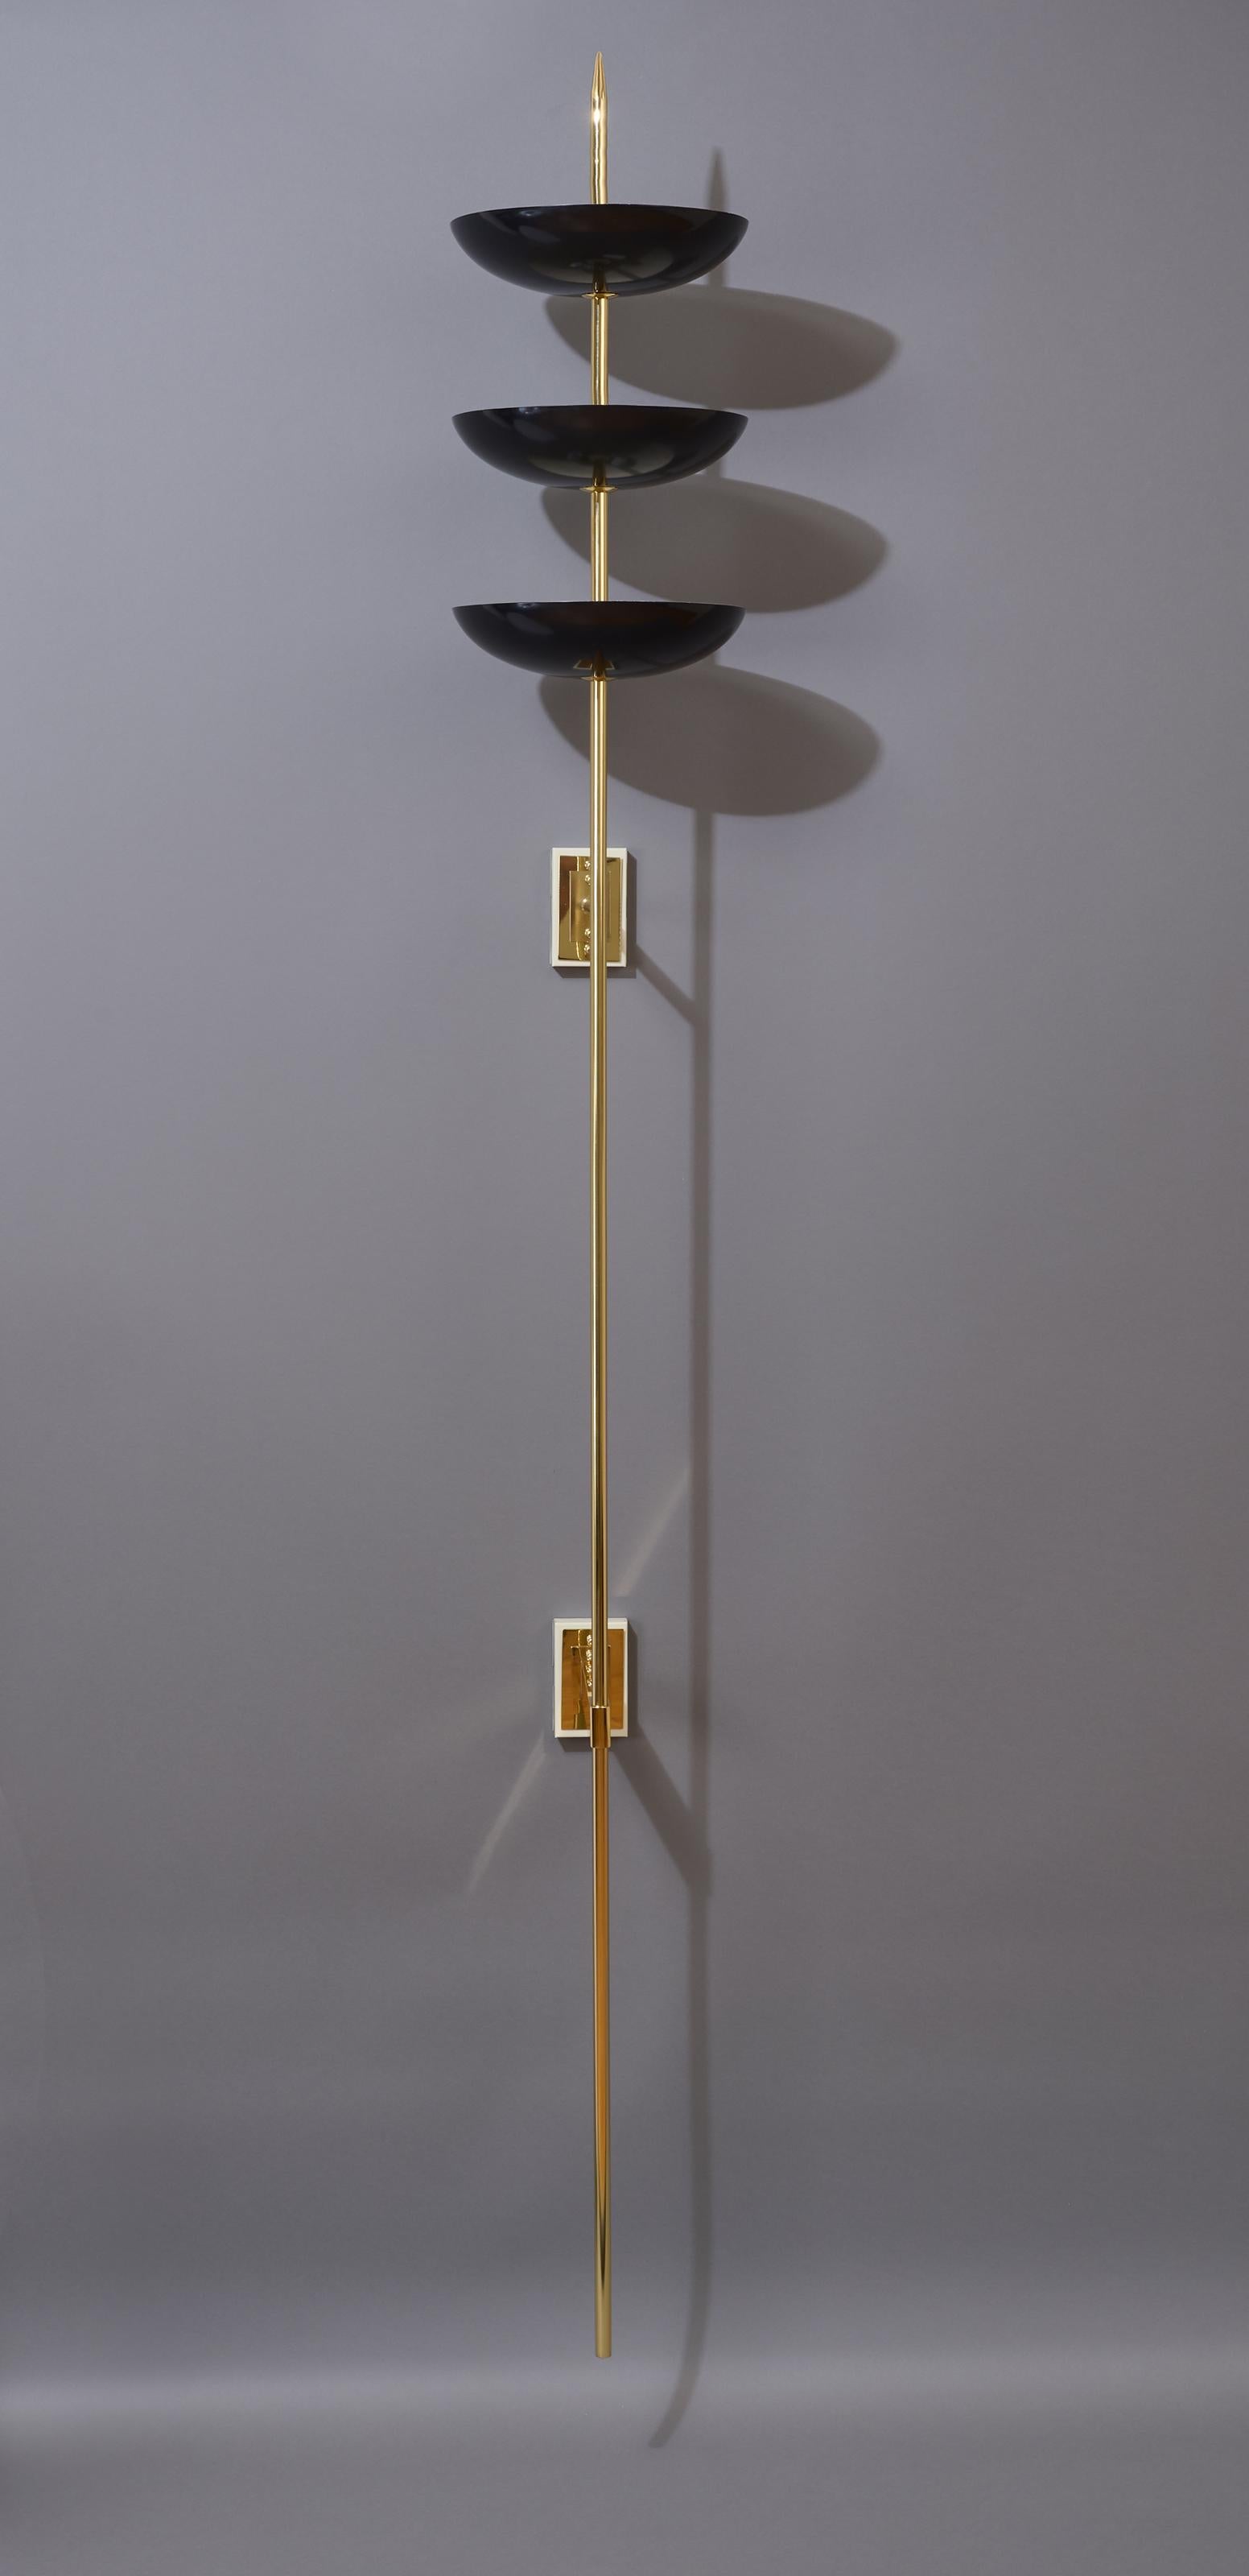 Stilnovo, Massive Pair of Three Bowl Sconces in Brass and Enamel, Italy, 1950s For Sale 3